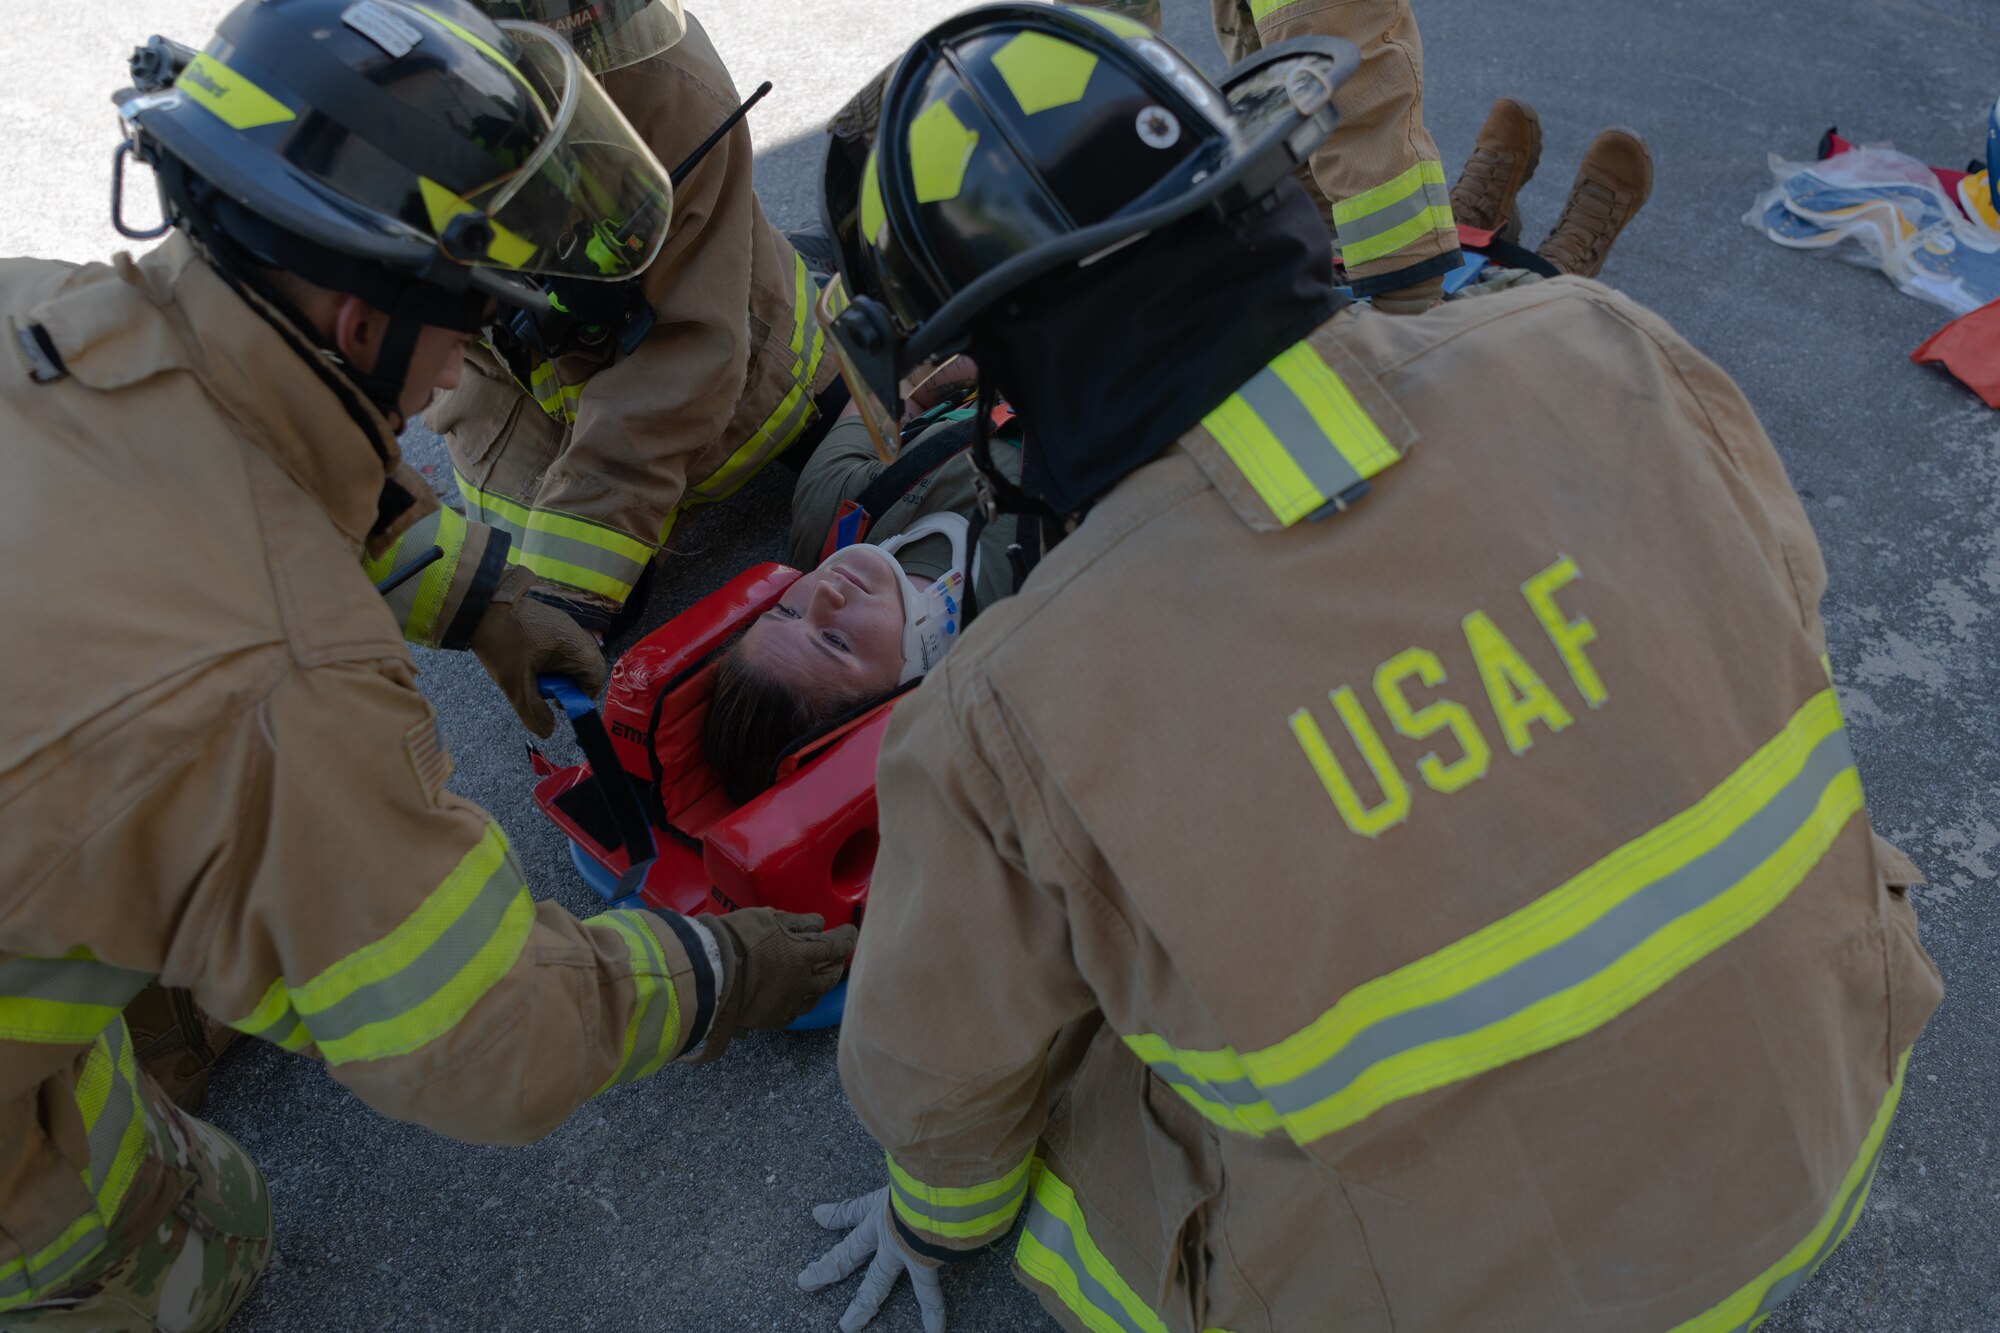 Pictures of the 18th CEF conducting vehicle extrication training on a simulated patient.